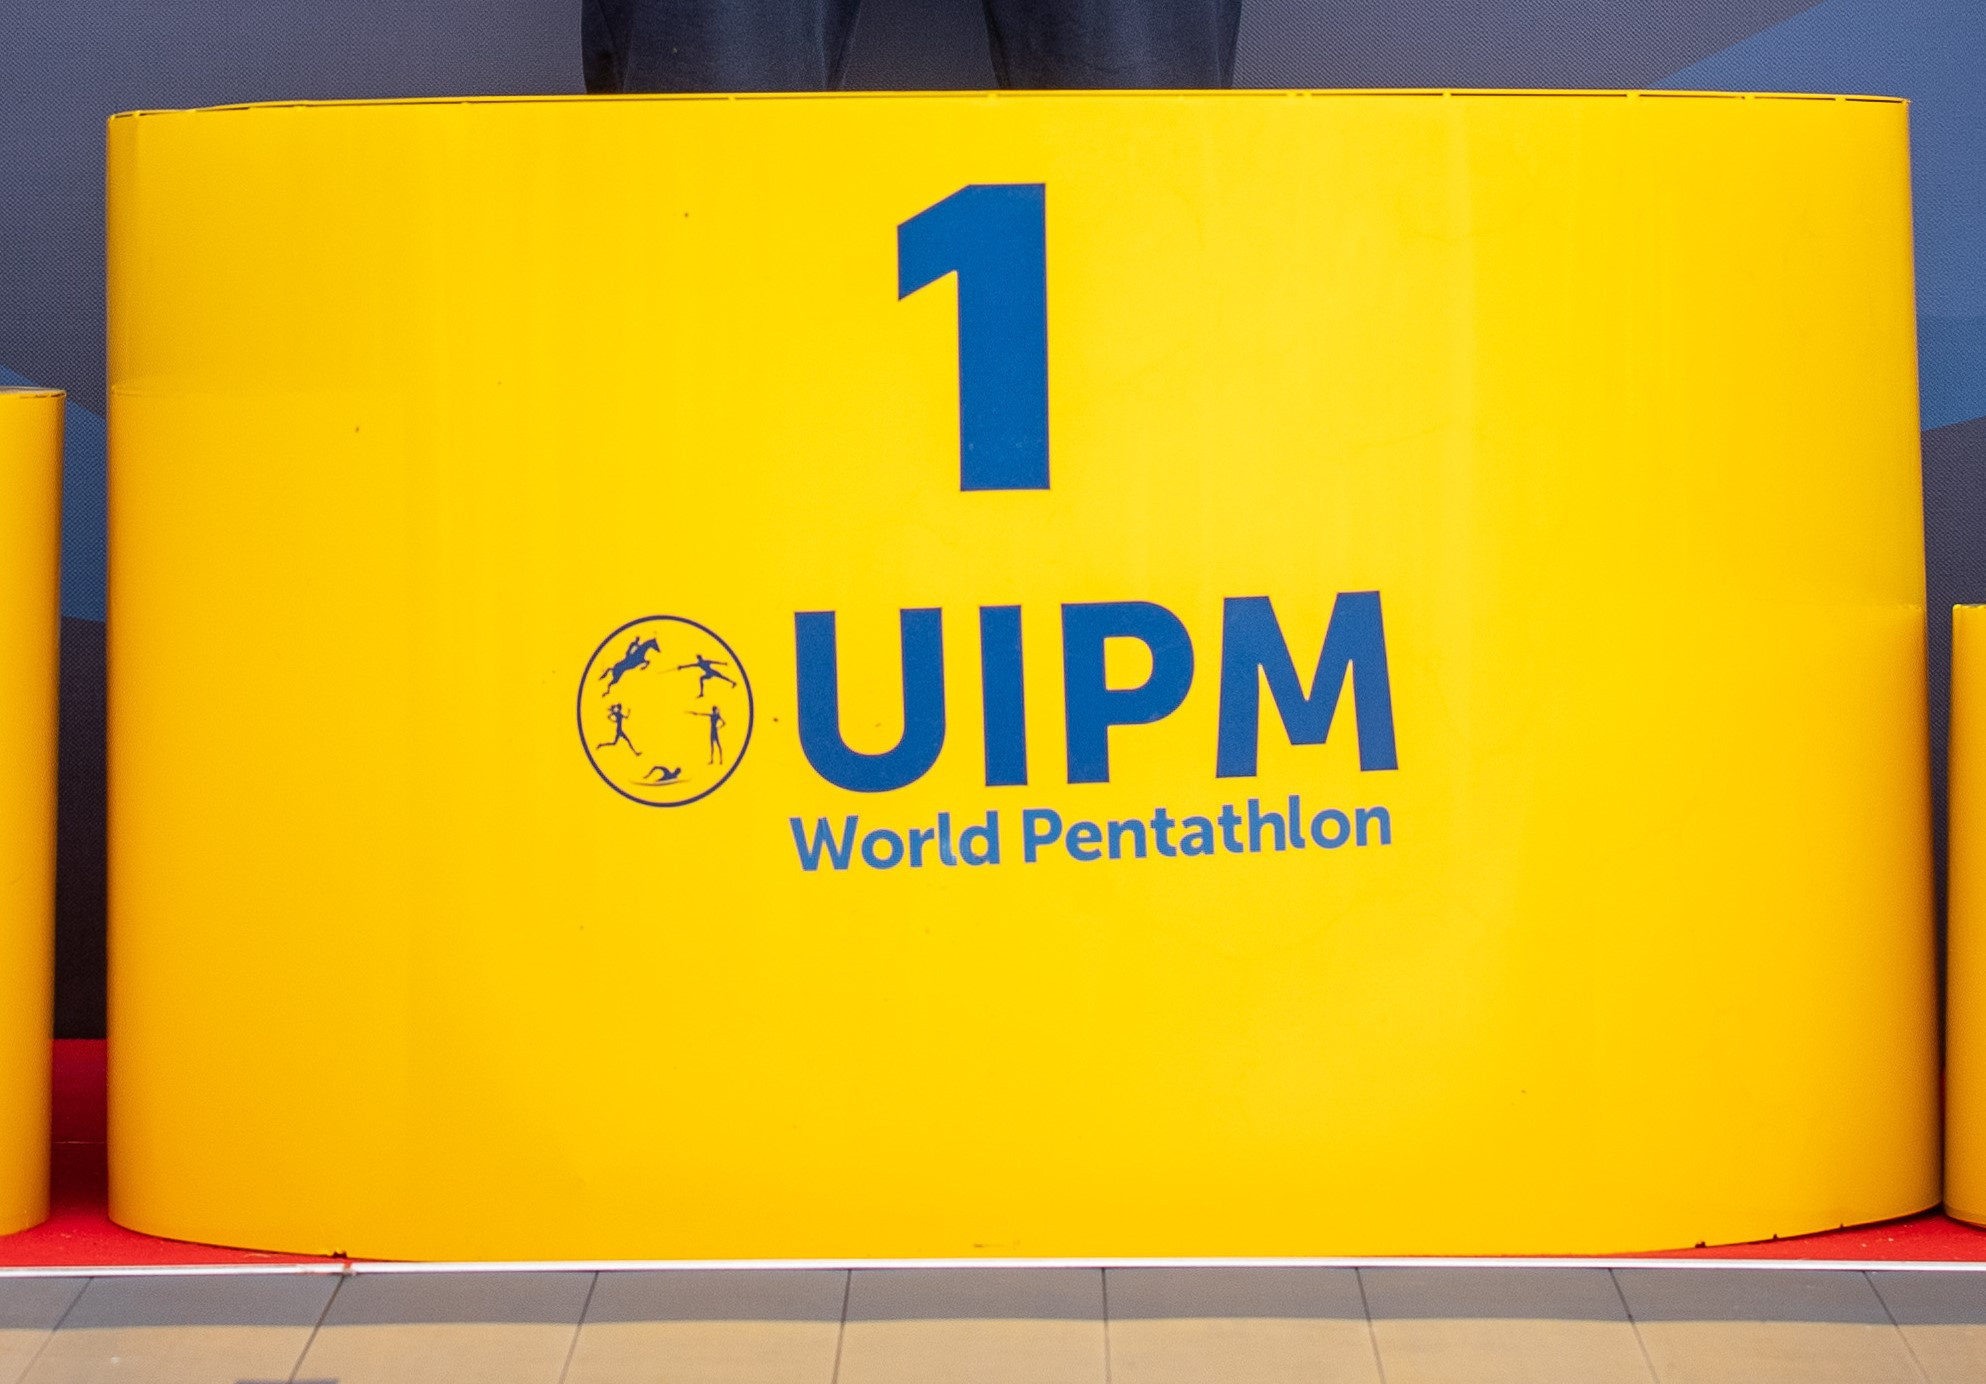 Danish NF claims staging UIPM Congress online an "absurd situation", as UIPM defends decision